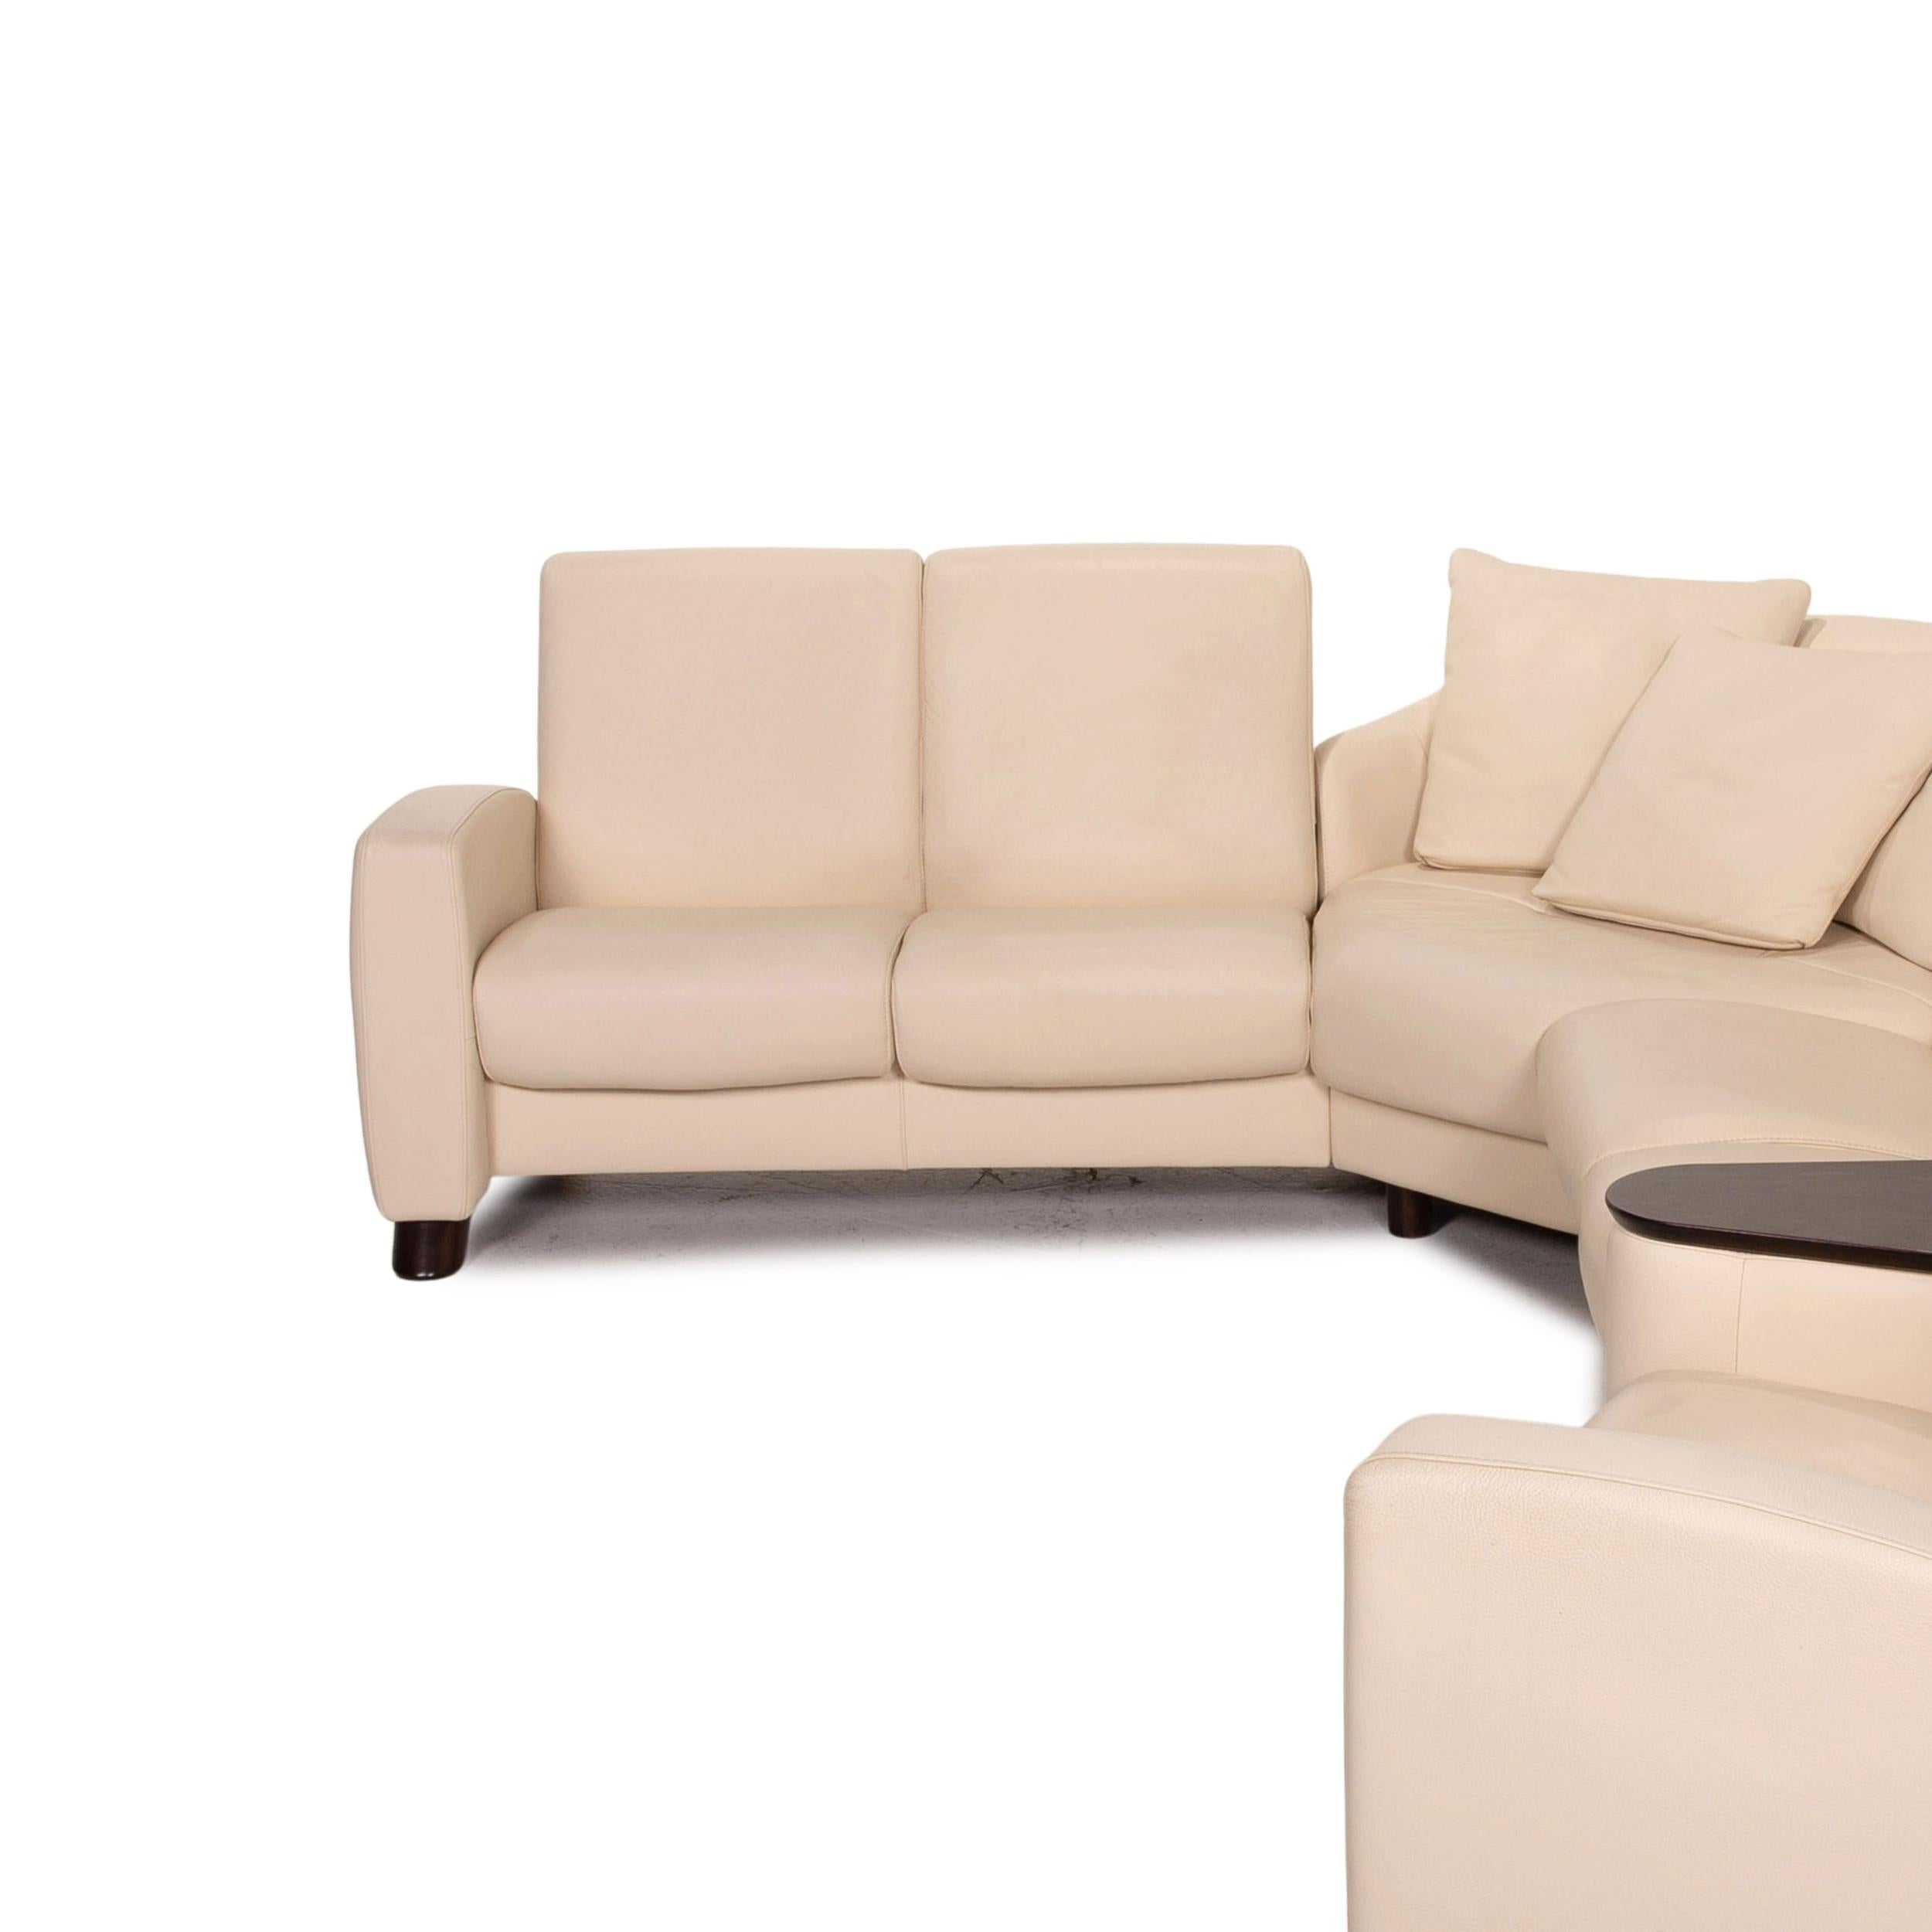 Stressless Arion Leather Corner Sofa Cream Relax Function Sofa Couch For Sale 2